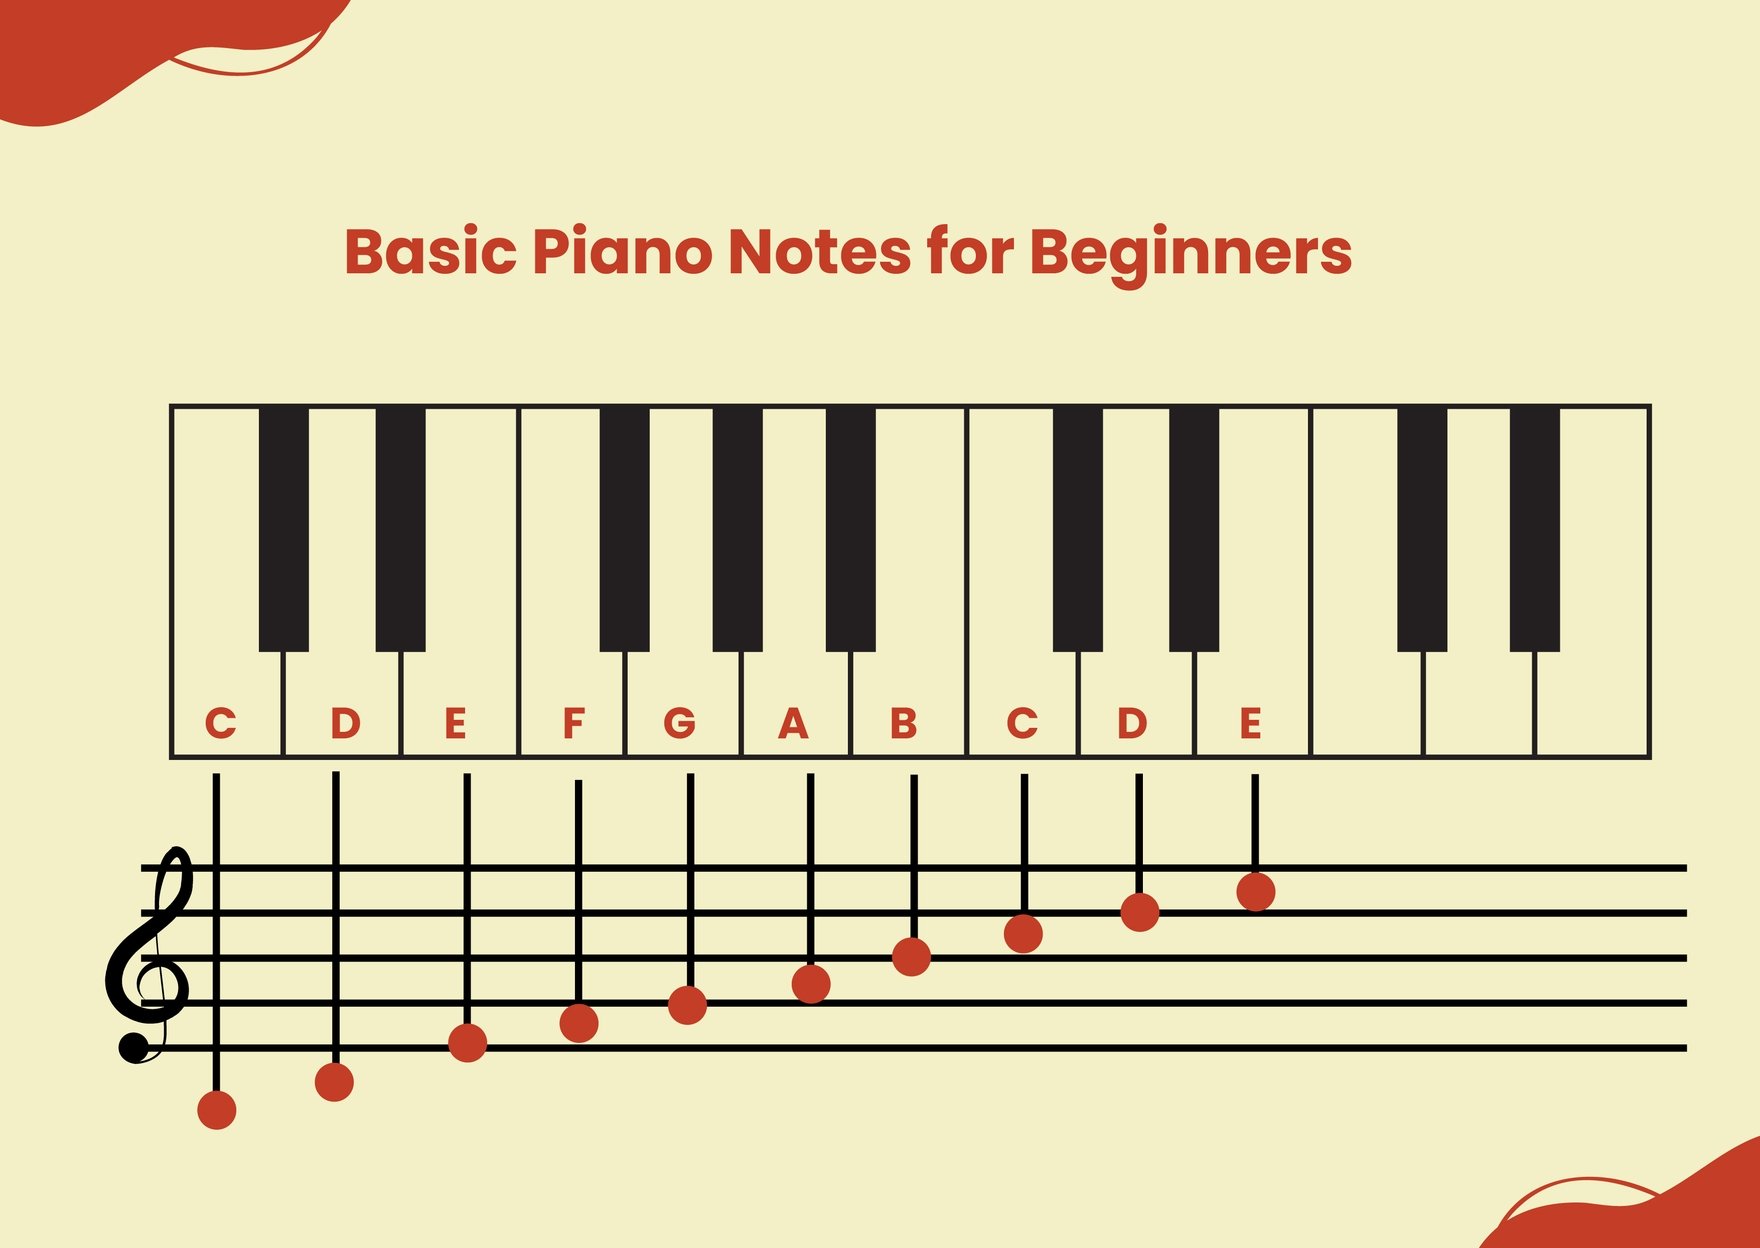 Piano Note Chart For Beginners Illustrator, PDF